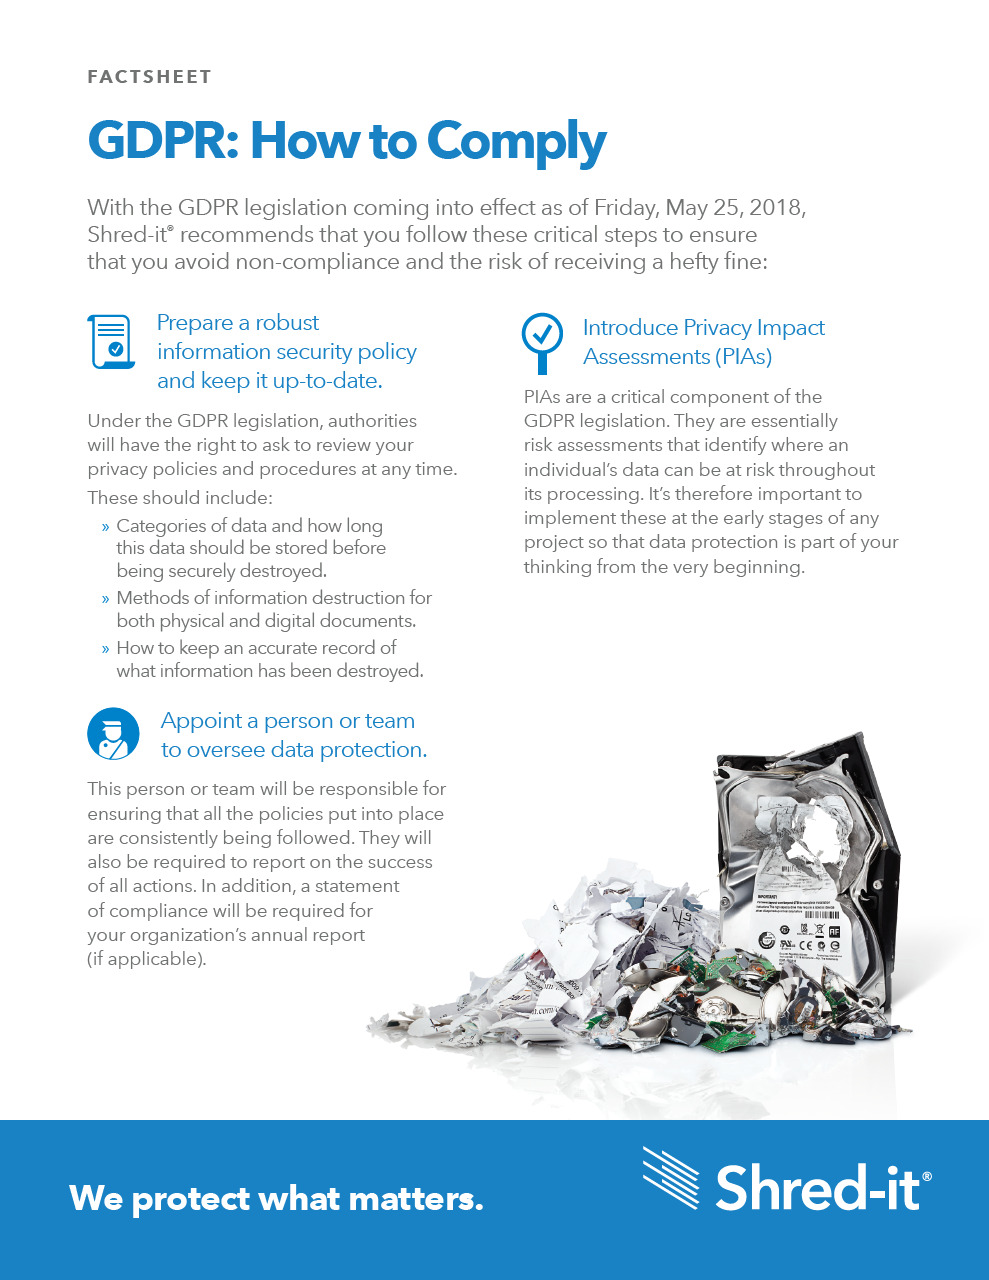 Shred-it-GDPR-How-To-Comply.pdf